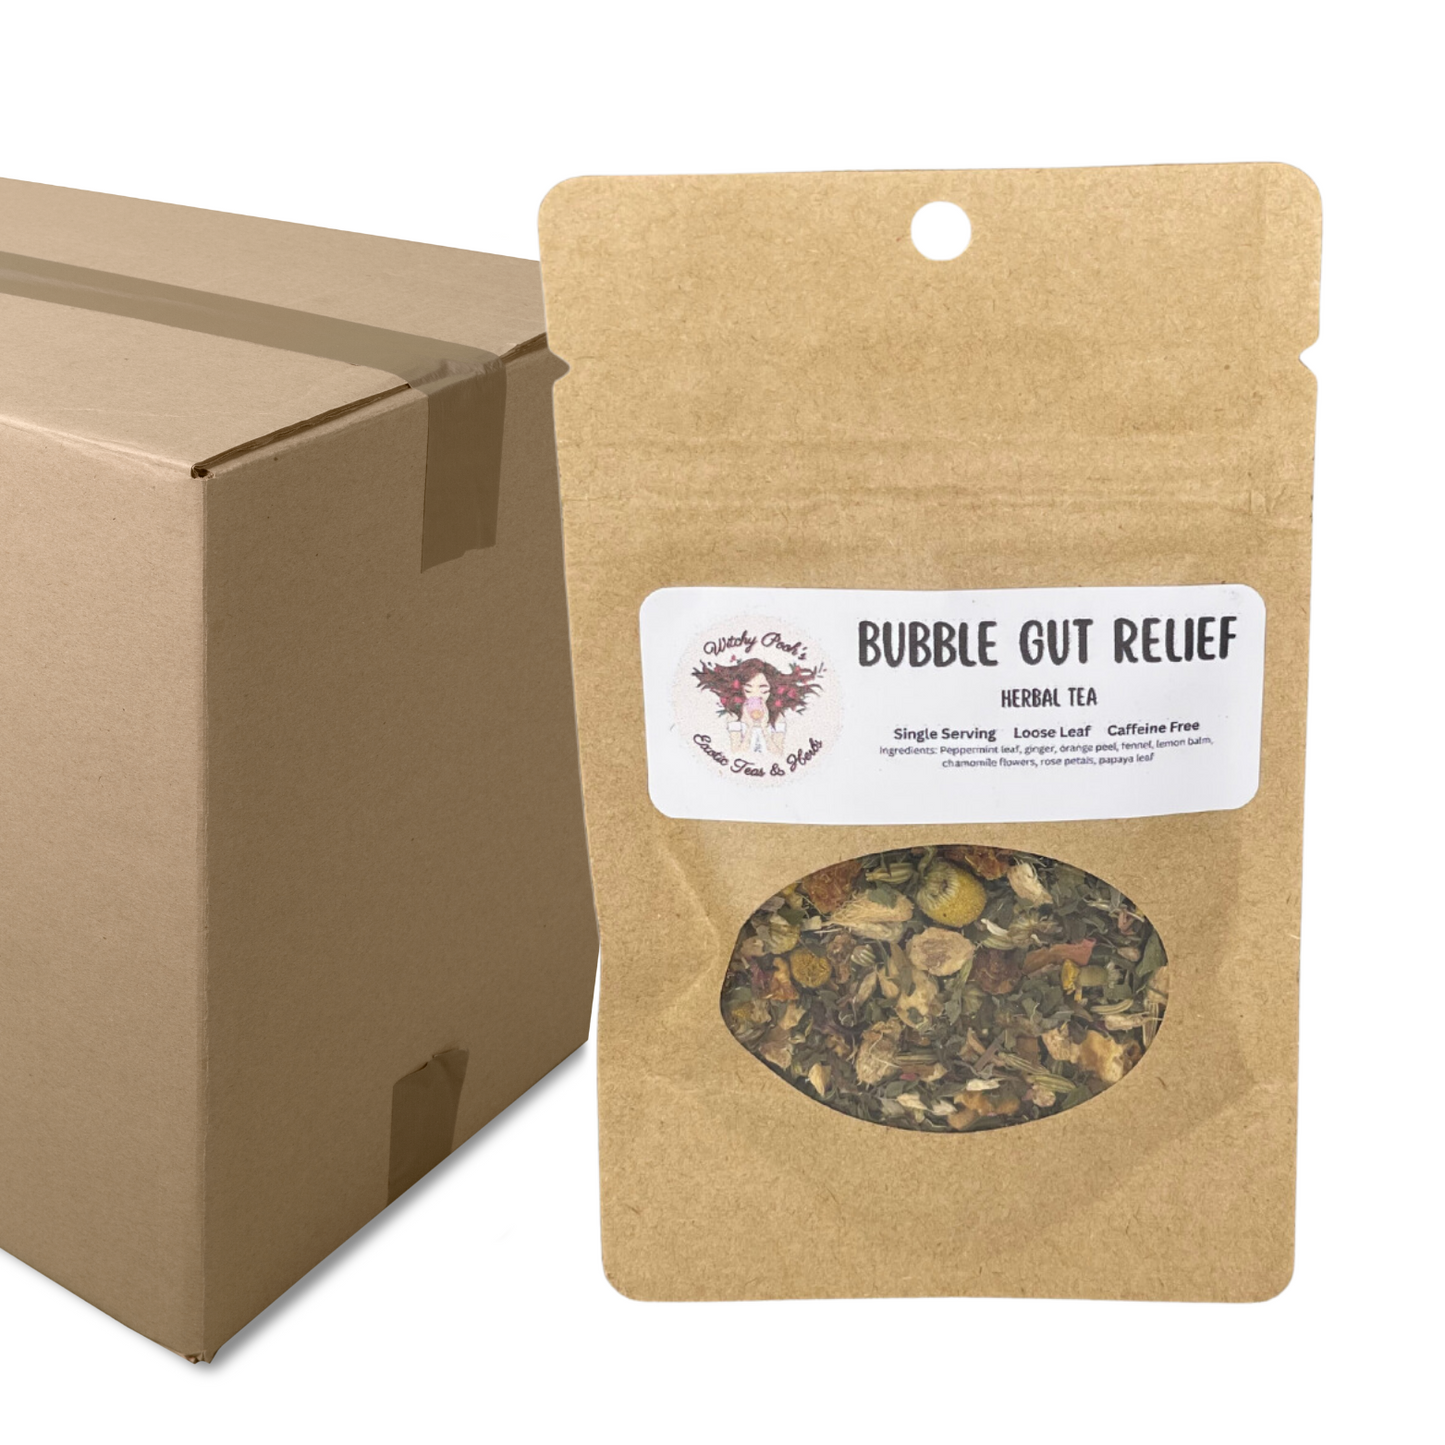 Bubble Gut Relief Loose Leaf Herbal Functional Tea, Caffeine Free, For Digestive Issues